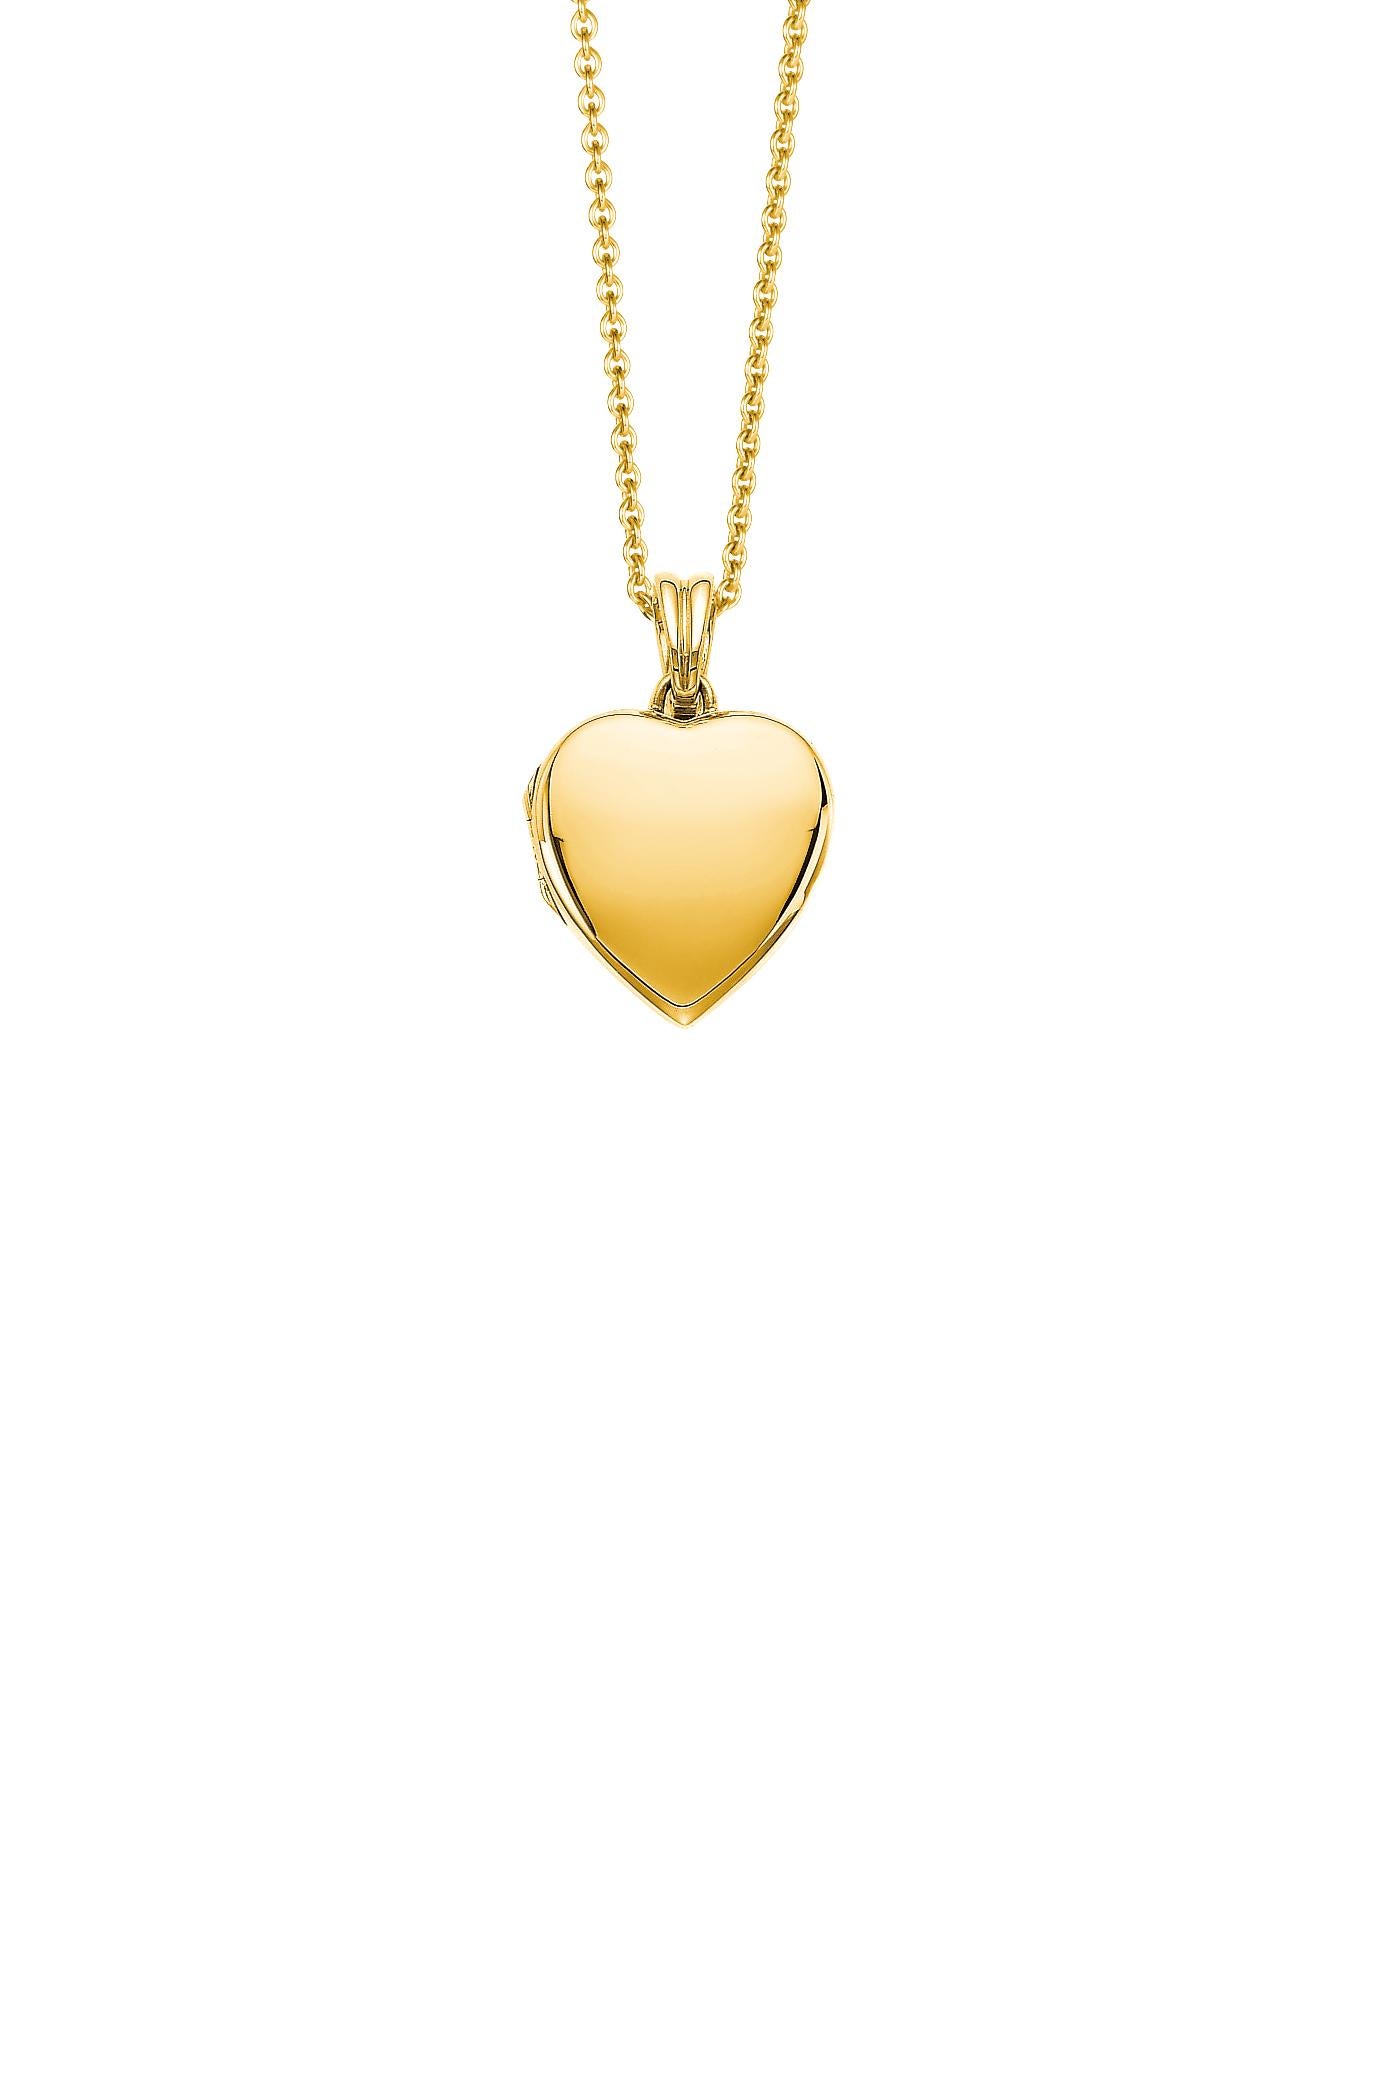 Victor Mayer customizable polished heart shaped locket pendant 18k yellow gold, Hallmark Collection, measurements app. 23.0 mm x 25.0 mm

About the creator Victor Mayer
Victor Mayer is internationally renowned for elegant timeless designs and